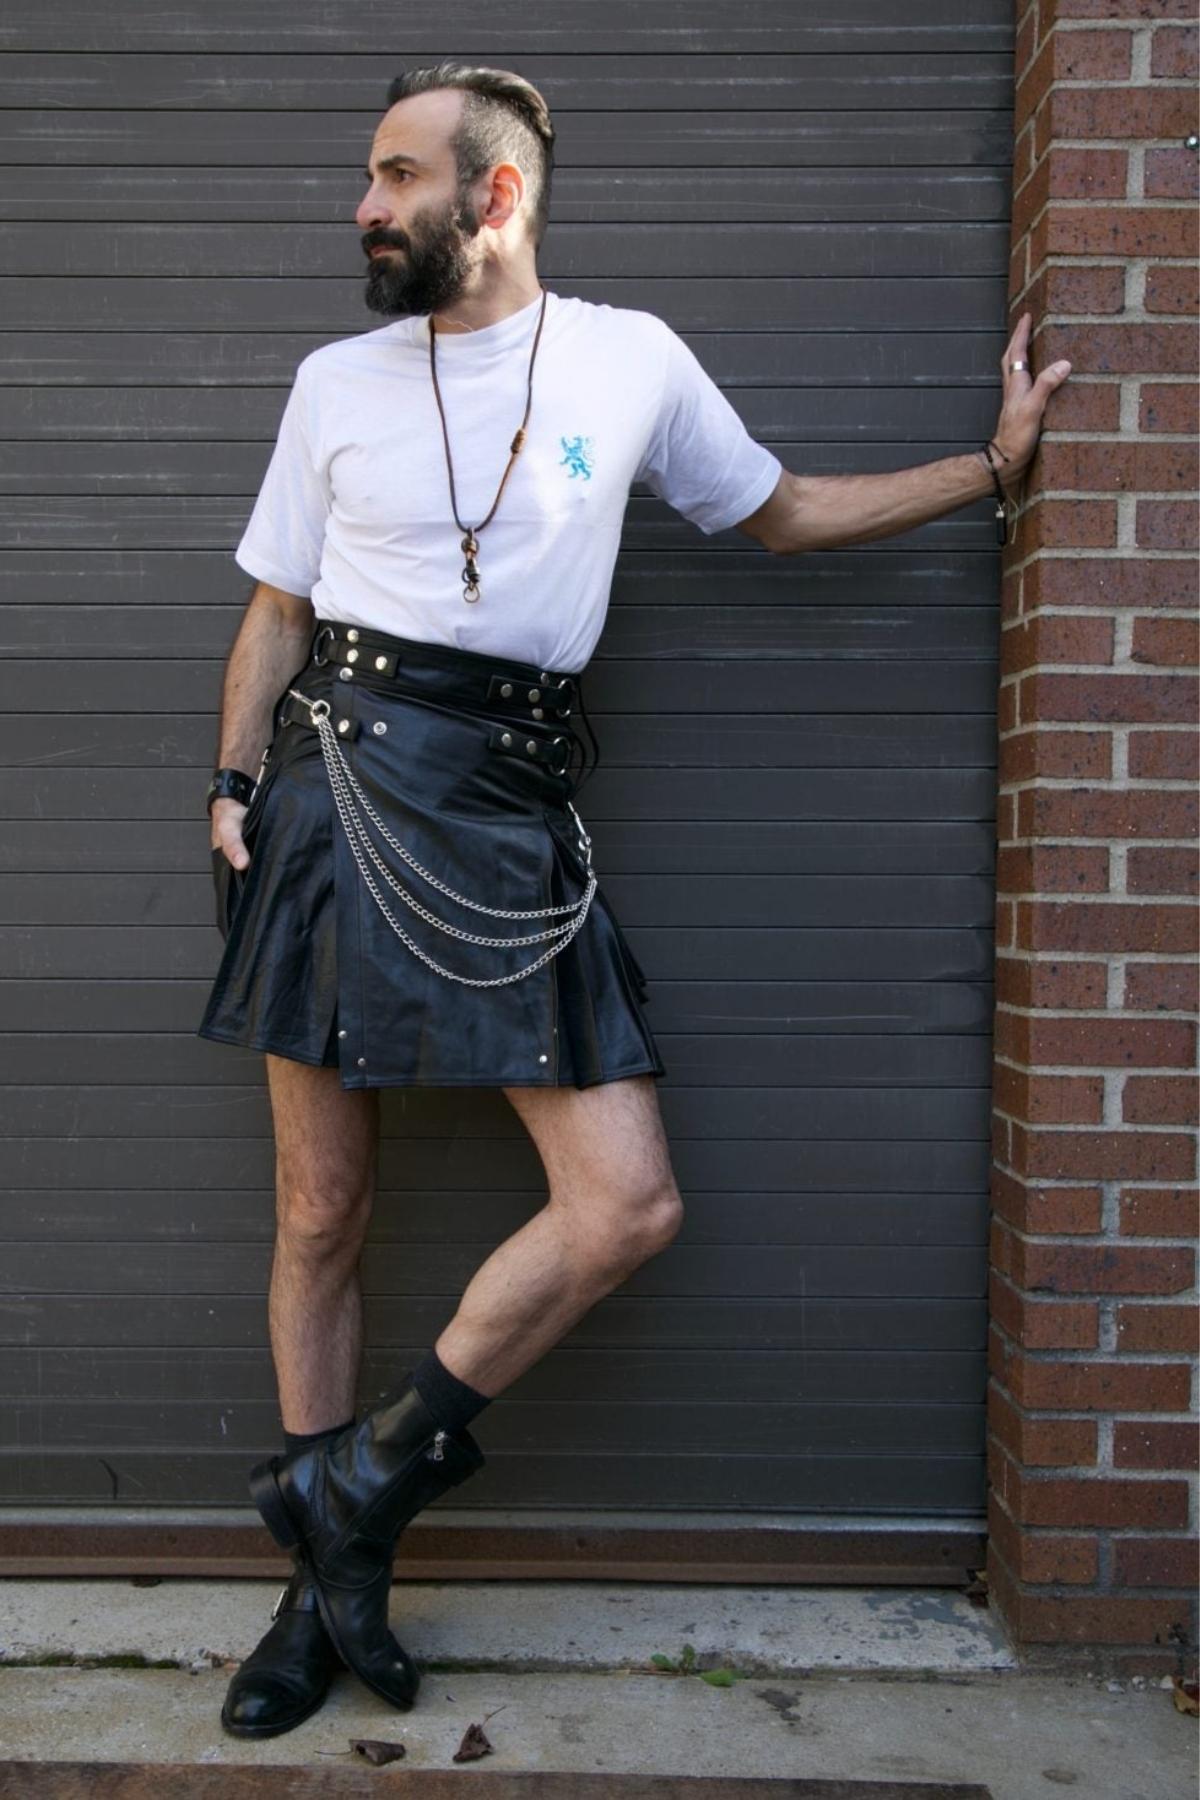 Smart Leather Kilt With Chains